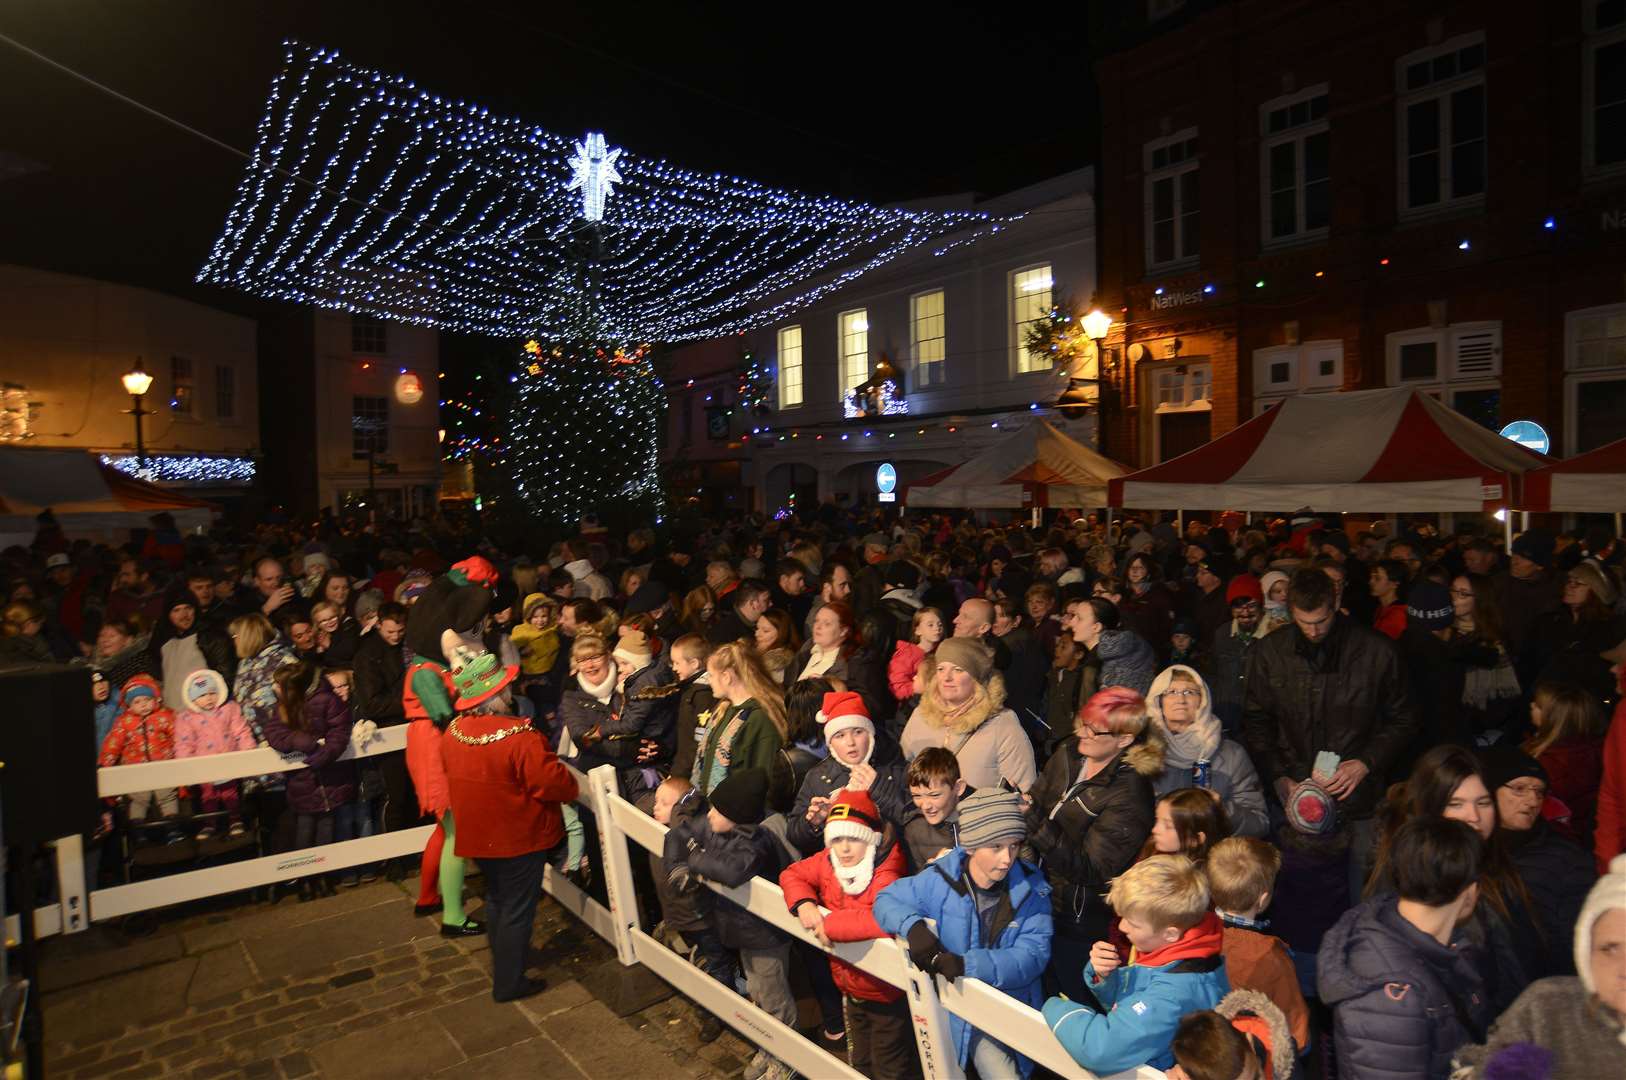 The festive community gathering for the Faversham Christmas lights switch-on has been cancelled